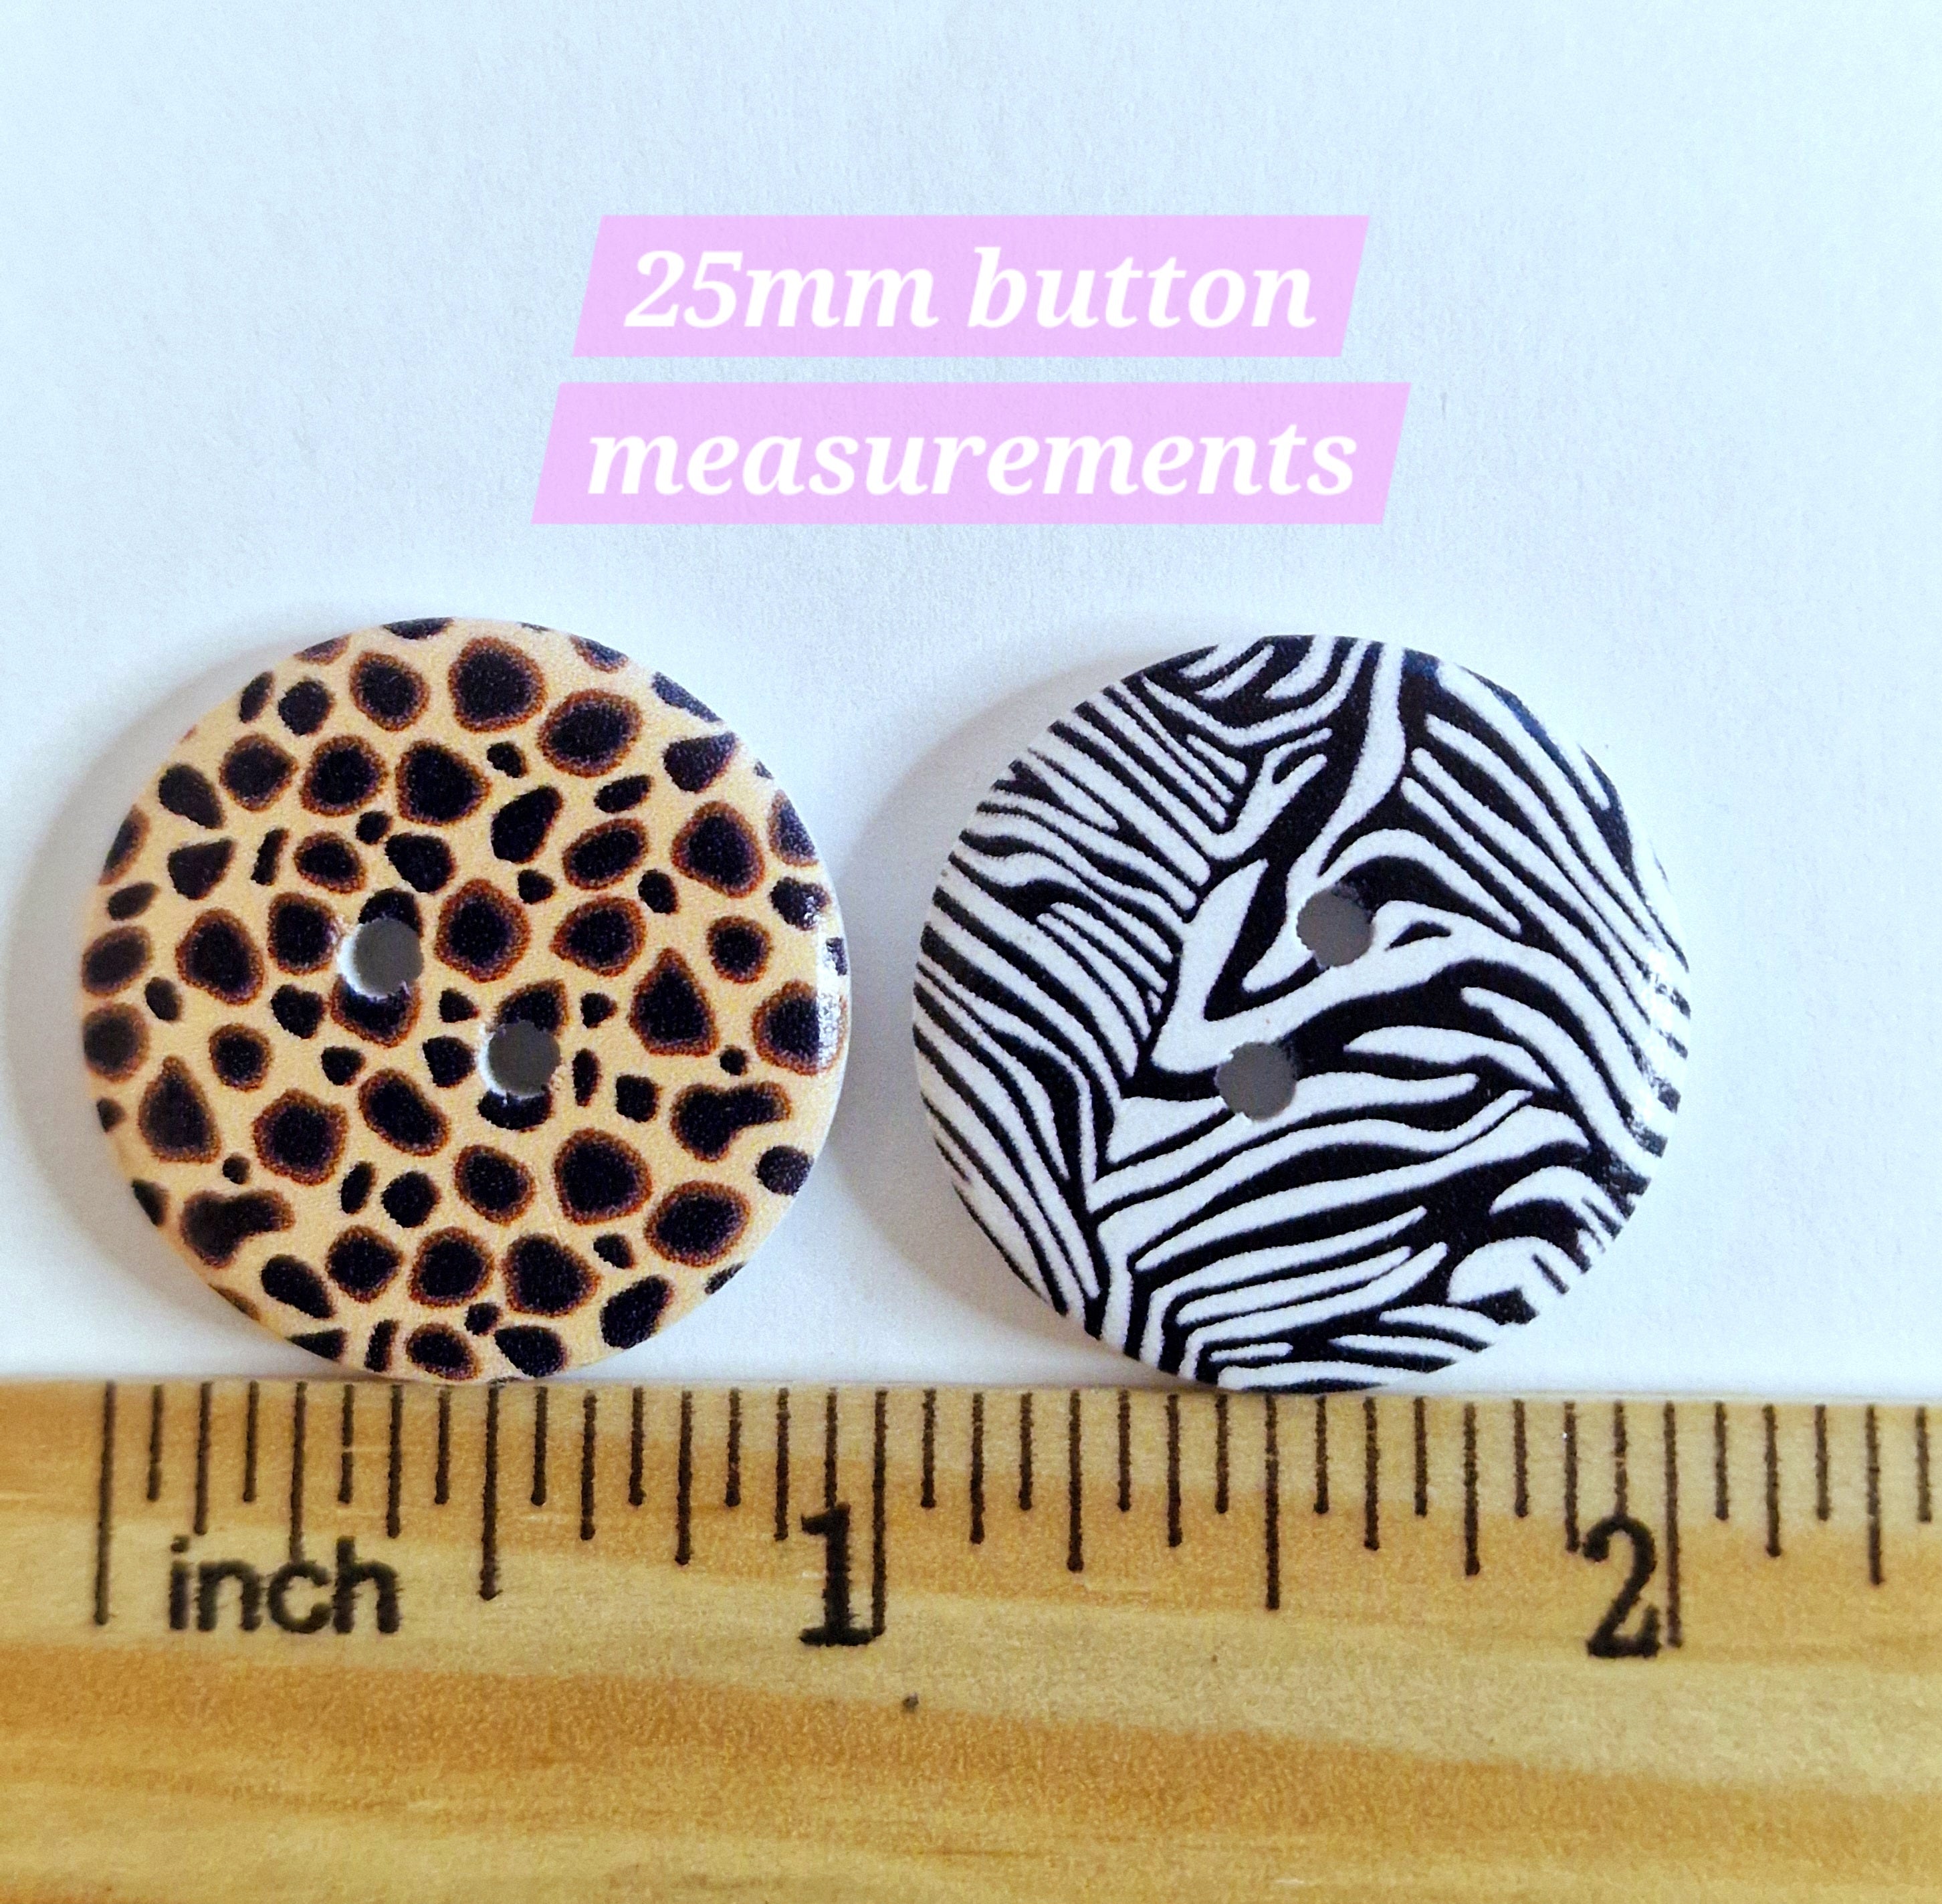 MajorCrafts 24pcs 25mm Mixed Animal Print 2 Holes Round Wood Sewing Buttons